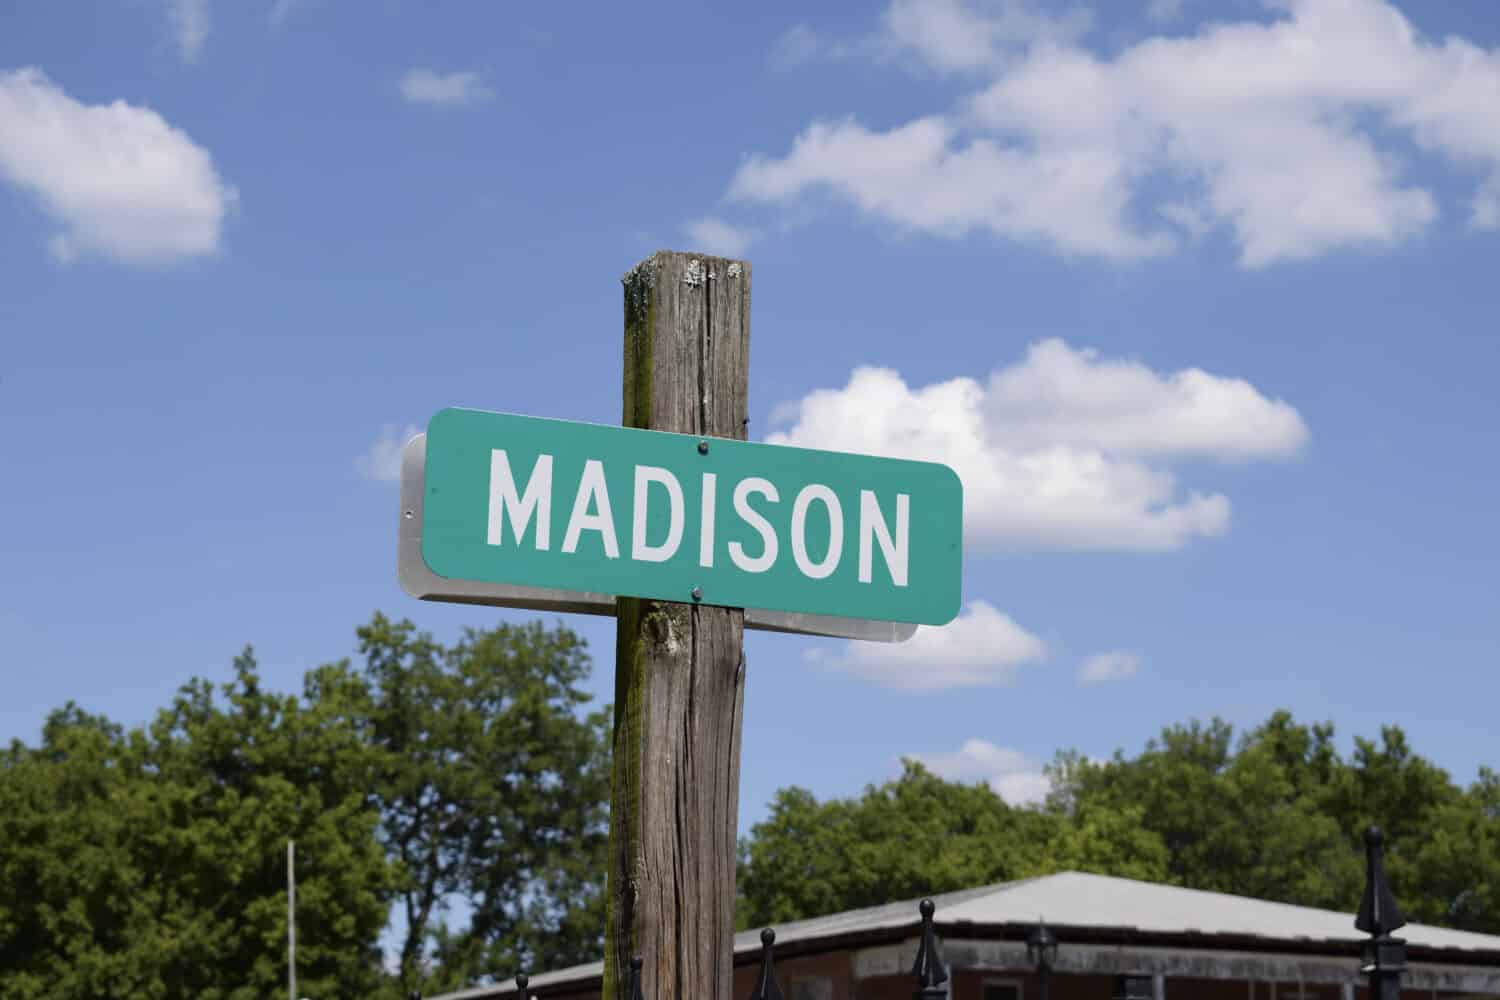 Madison city street sign in the clouds in downtown Madison, AL